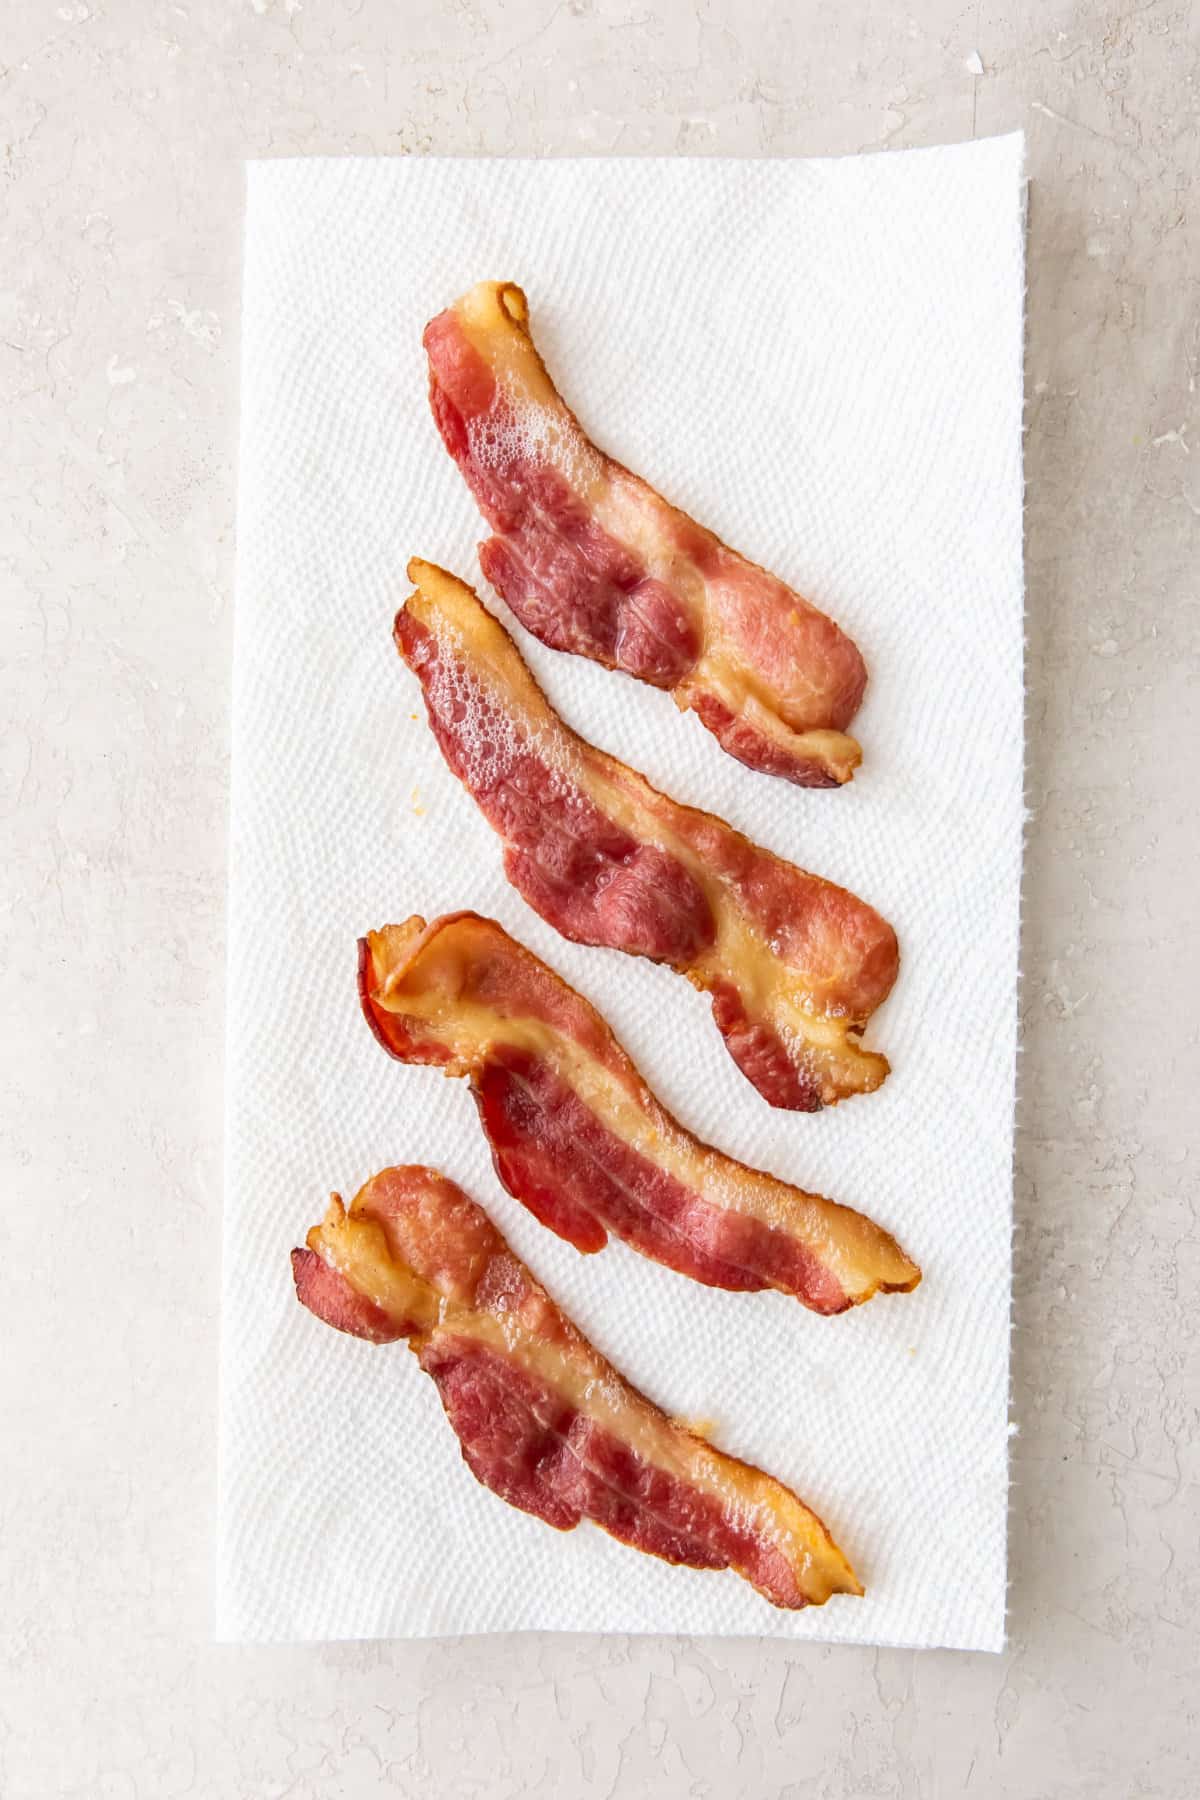 bacon cooling on paper towels.